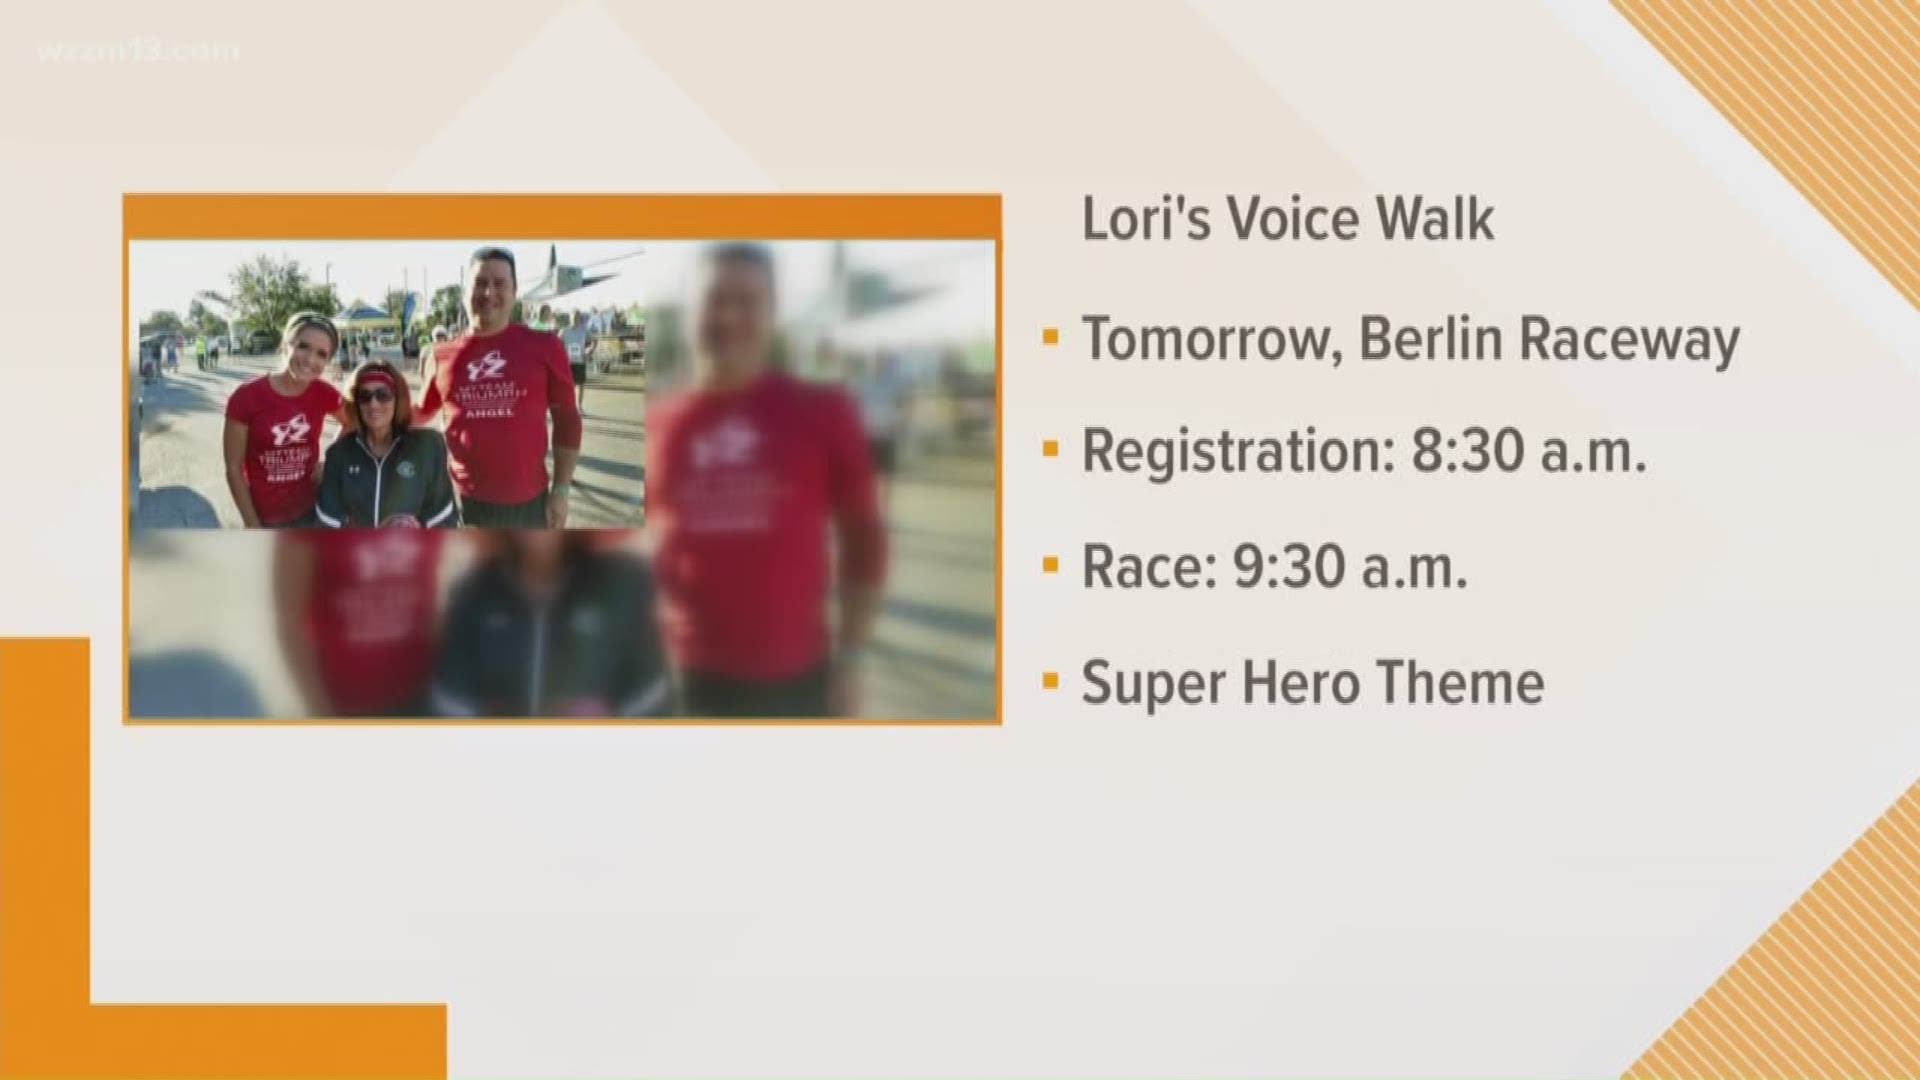 Lori's Voice Walk for the Challenged coming to Berlin Raceway